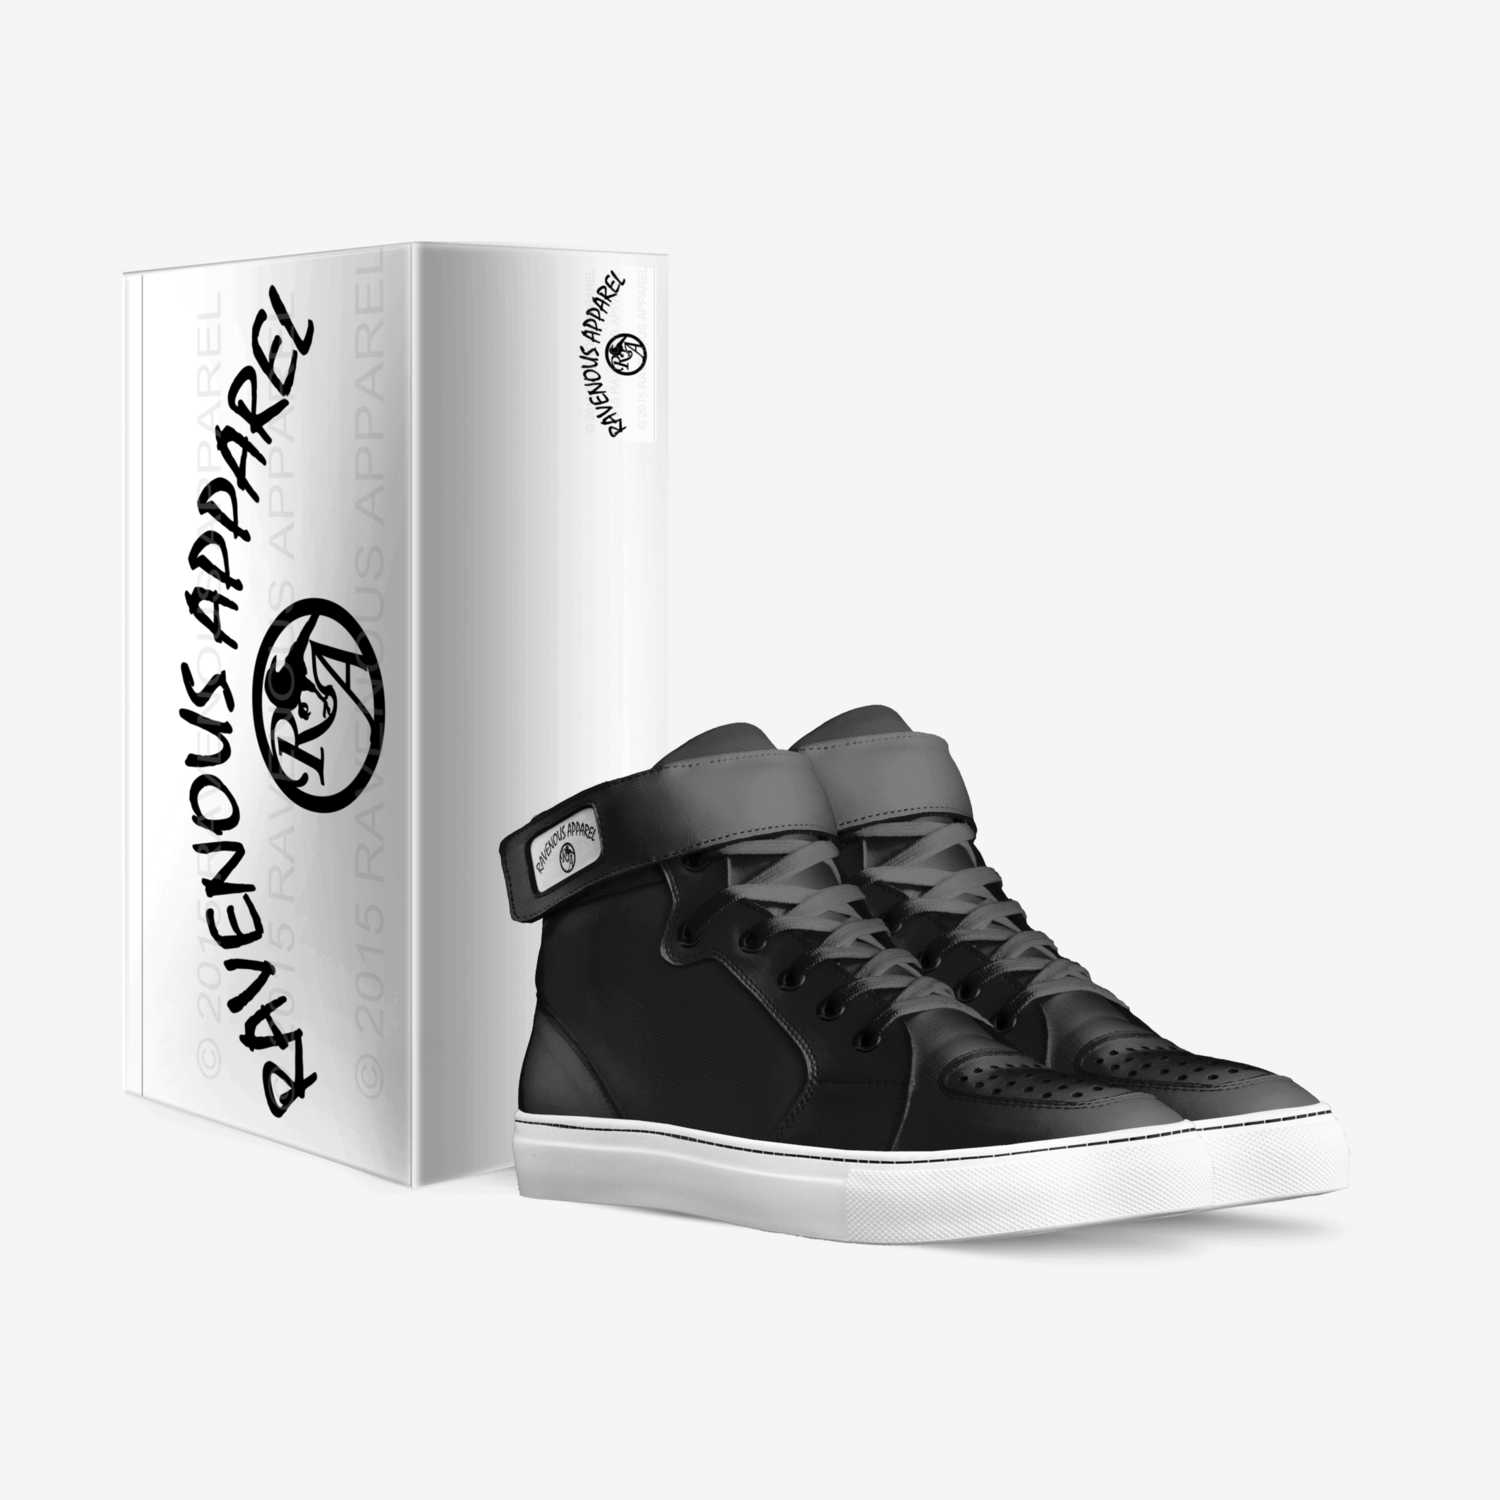 RAVENOUS1S custom made in Italy shoes by Thomas Rodriguez | Box view